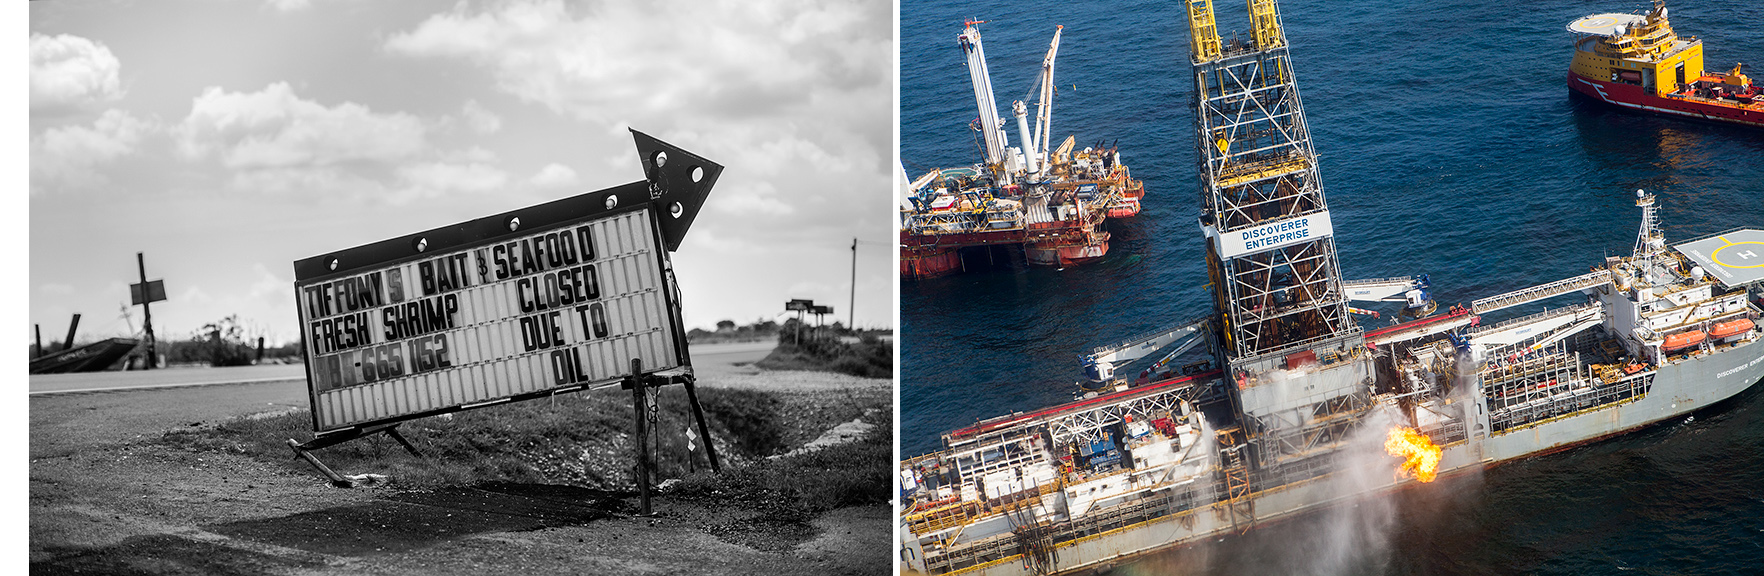   Louisiana, USA &nbsp;-&nbsp;This series of diptychs cover the Louisiana fishing coastlines of Grand Isle, Port Fourchon and Venice that were severely impacted in April of 2010 by the largest offshore oil spill in U.S. history. 